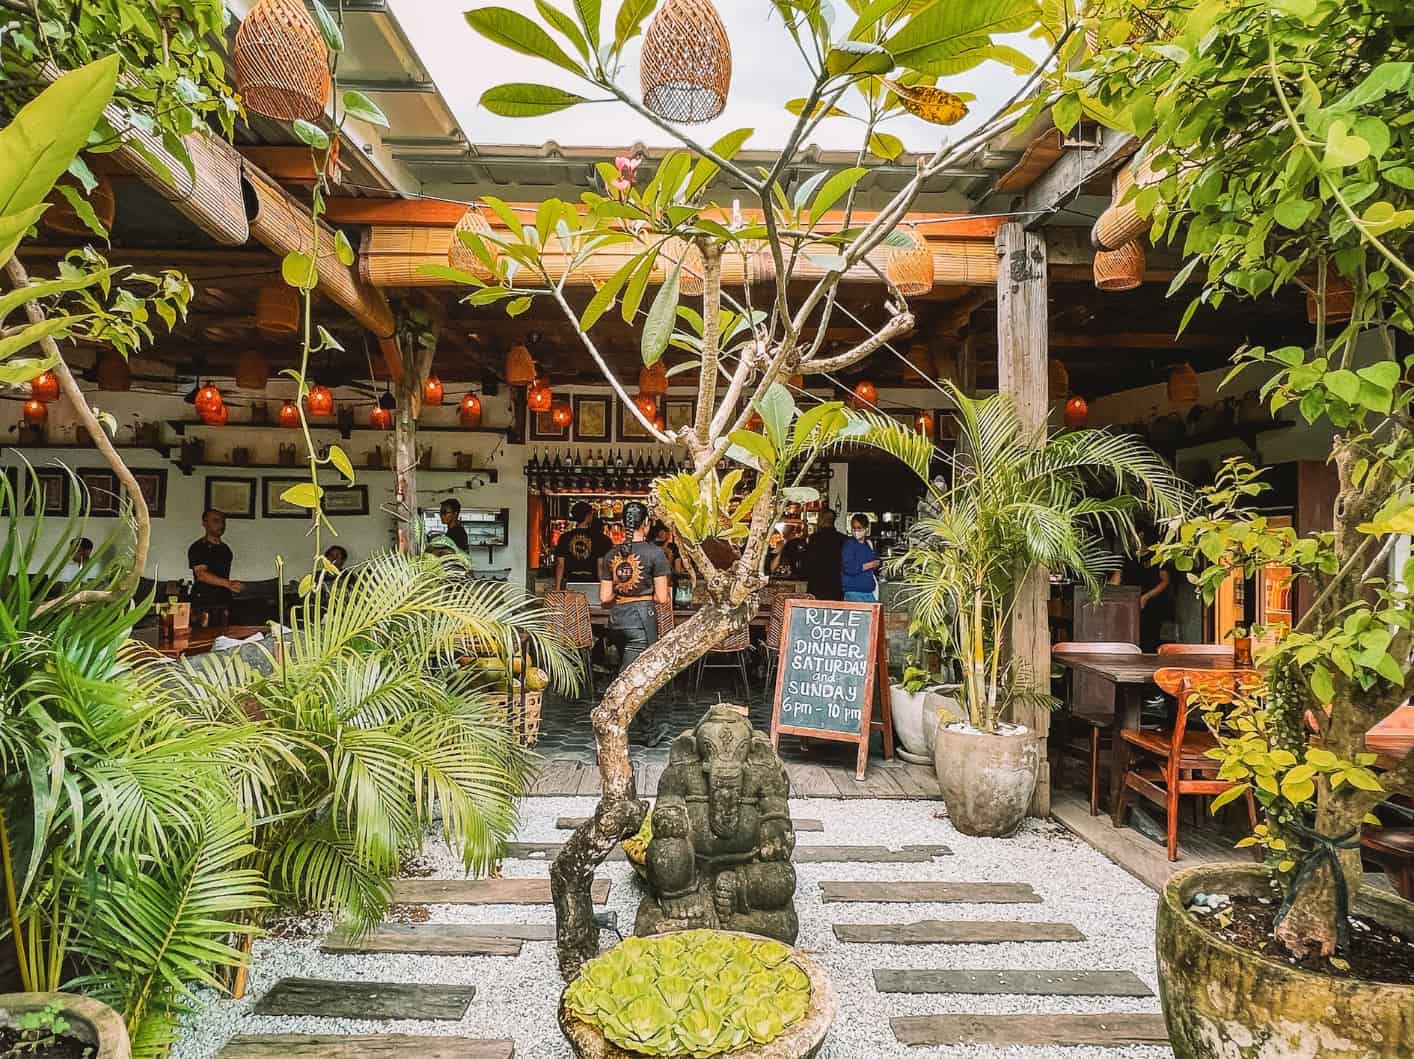 The interior of the beautiful RiZE Cafe in Canggu Bali